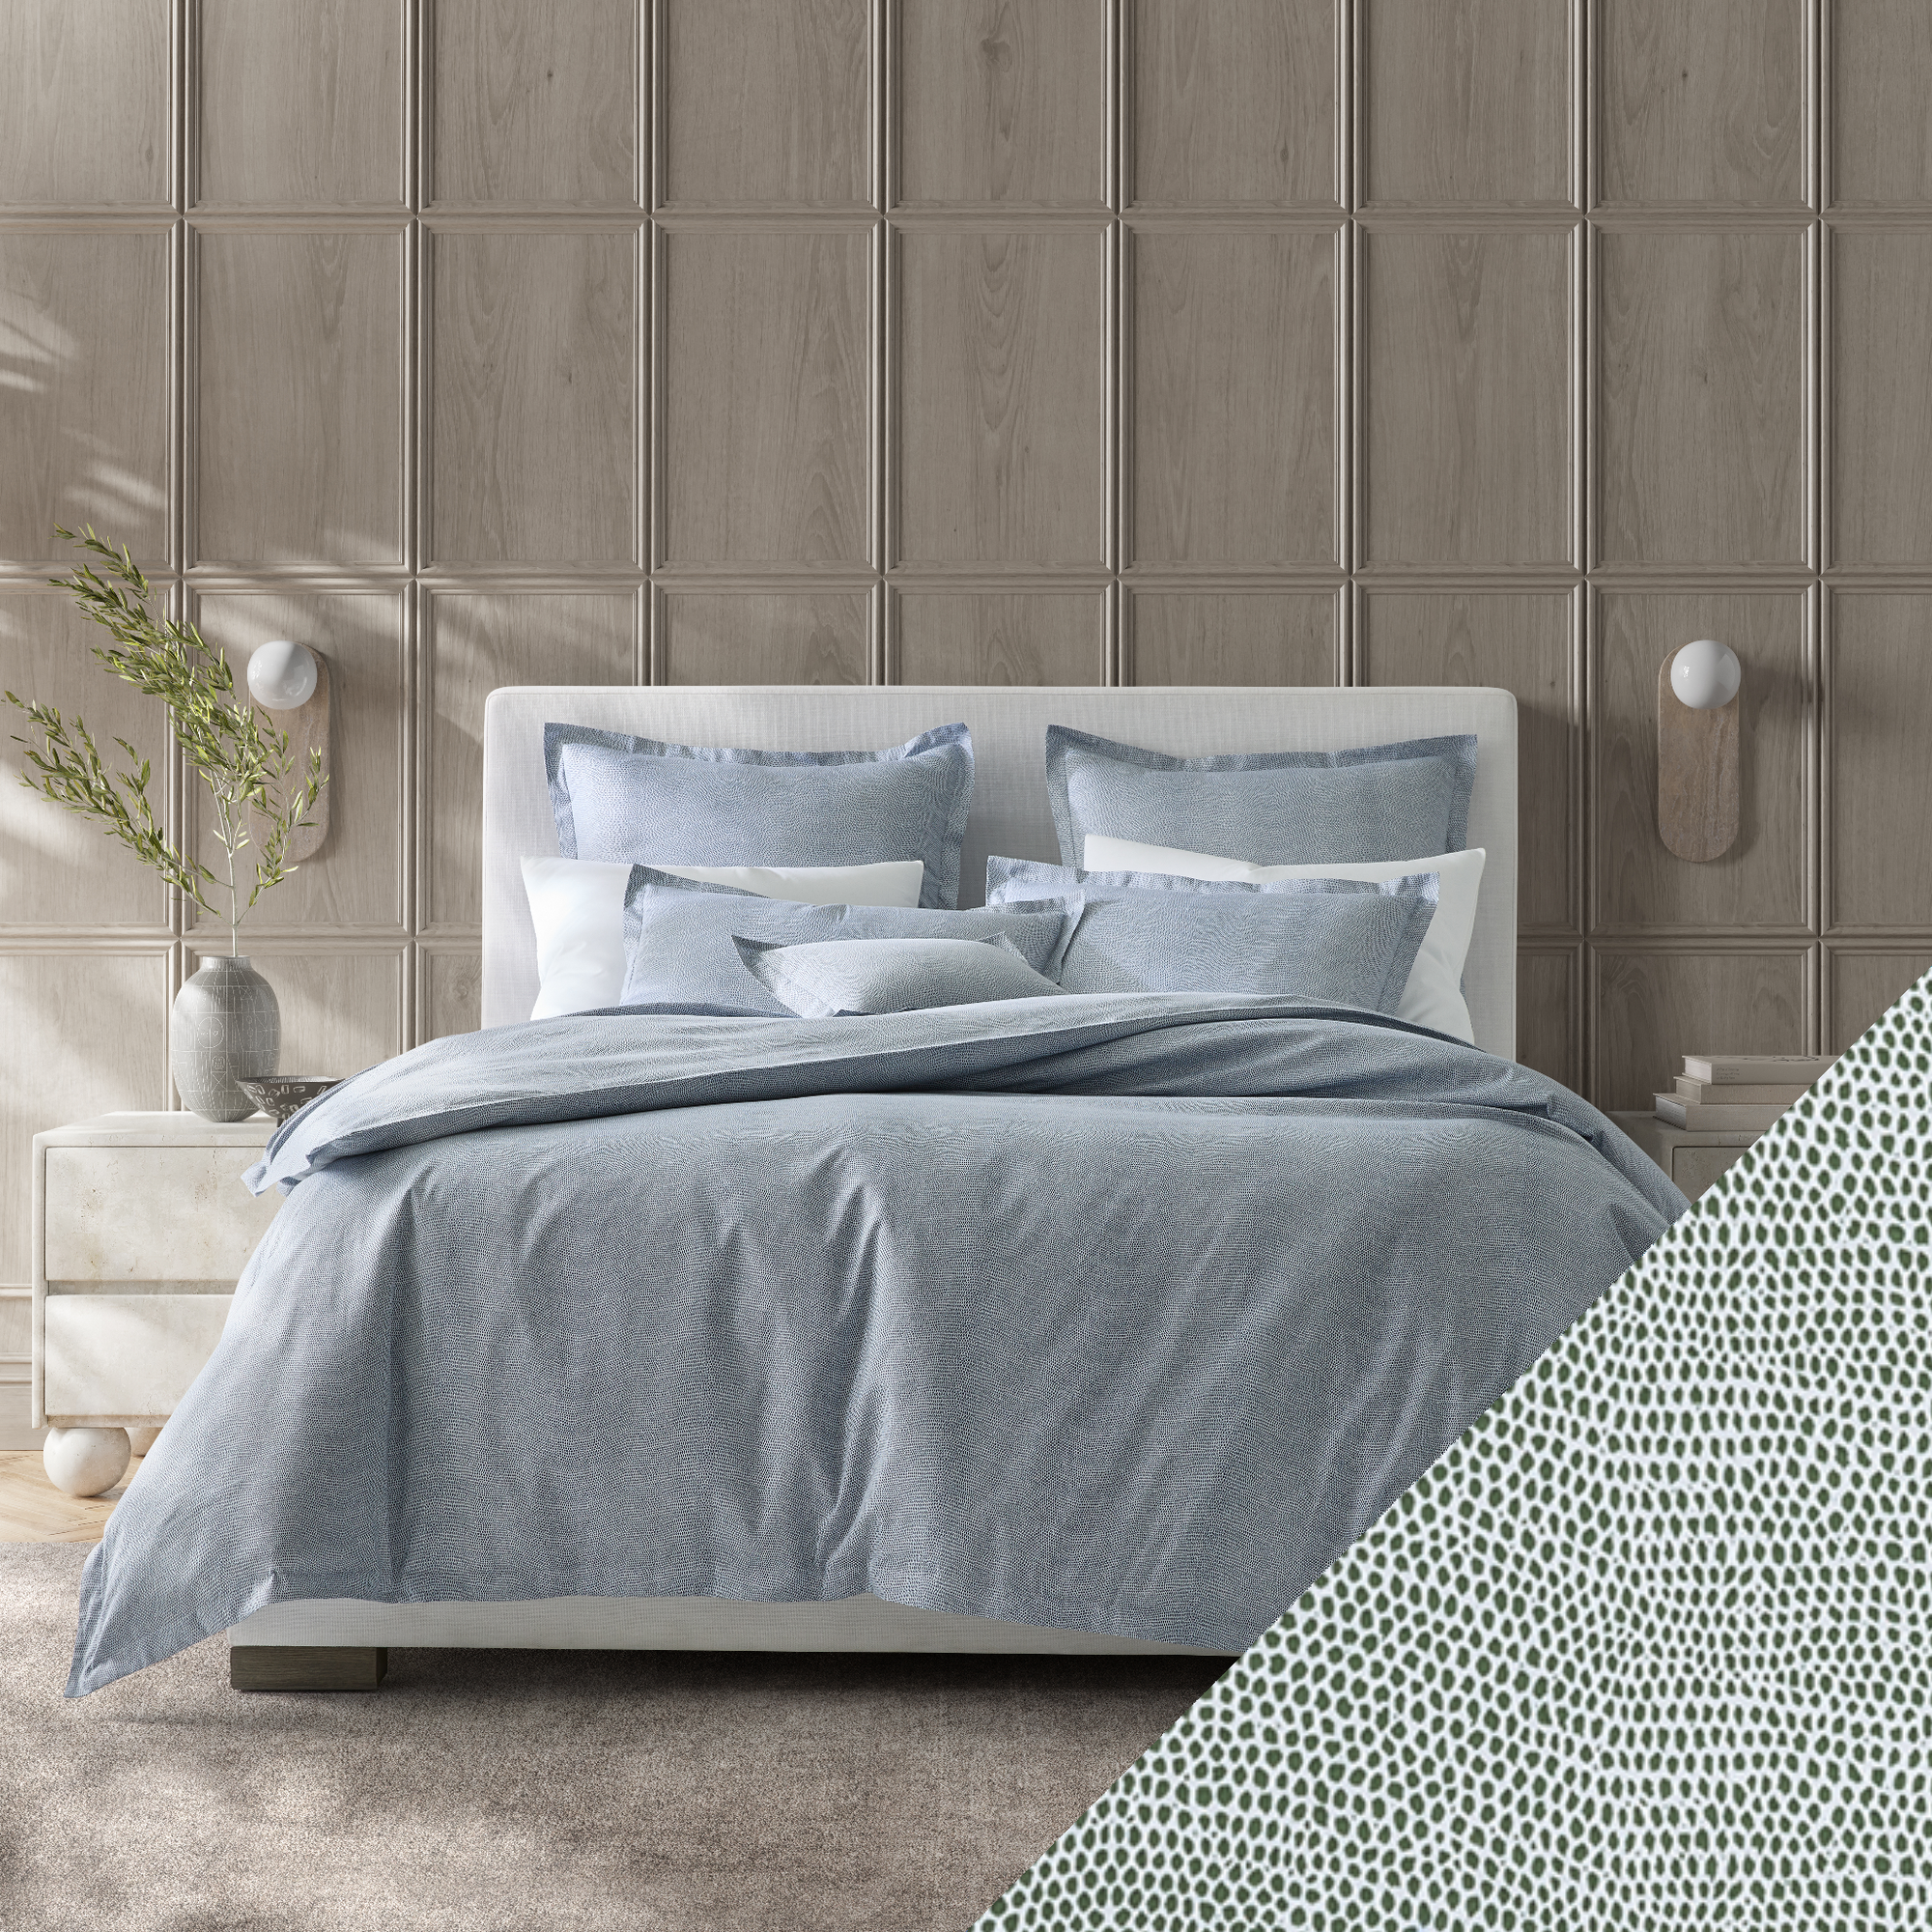 Full Bed Dressed in Steel Blue Matouk Jasper Bedding with Green Swatch